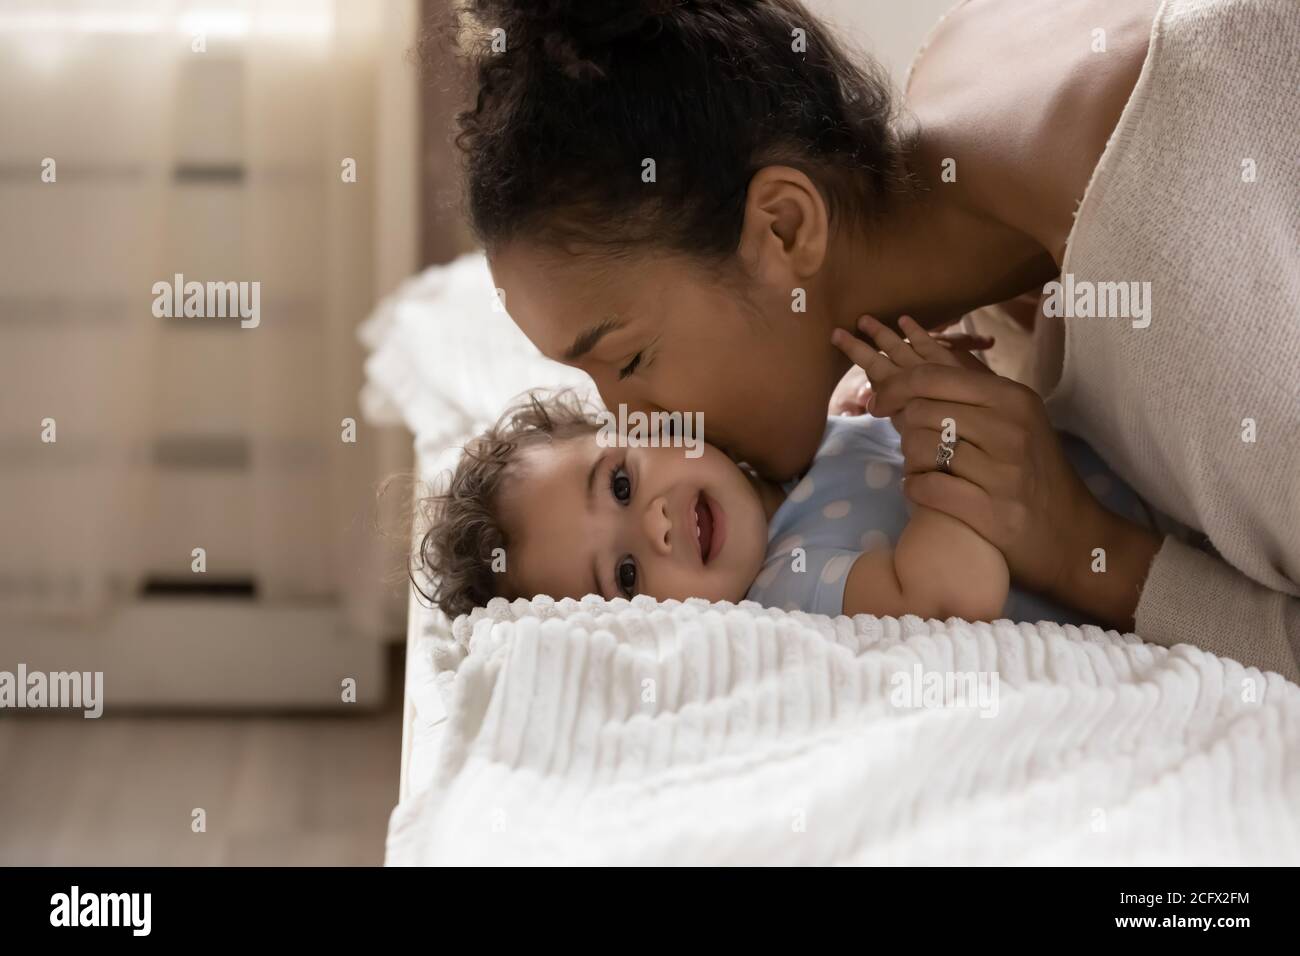 Affectionate african ethnicity mother kissing cheek of little toddler baby. Stock Photo